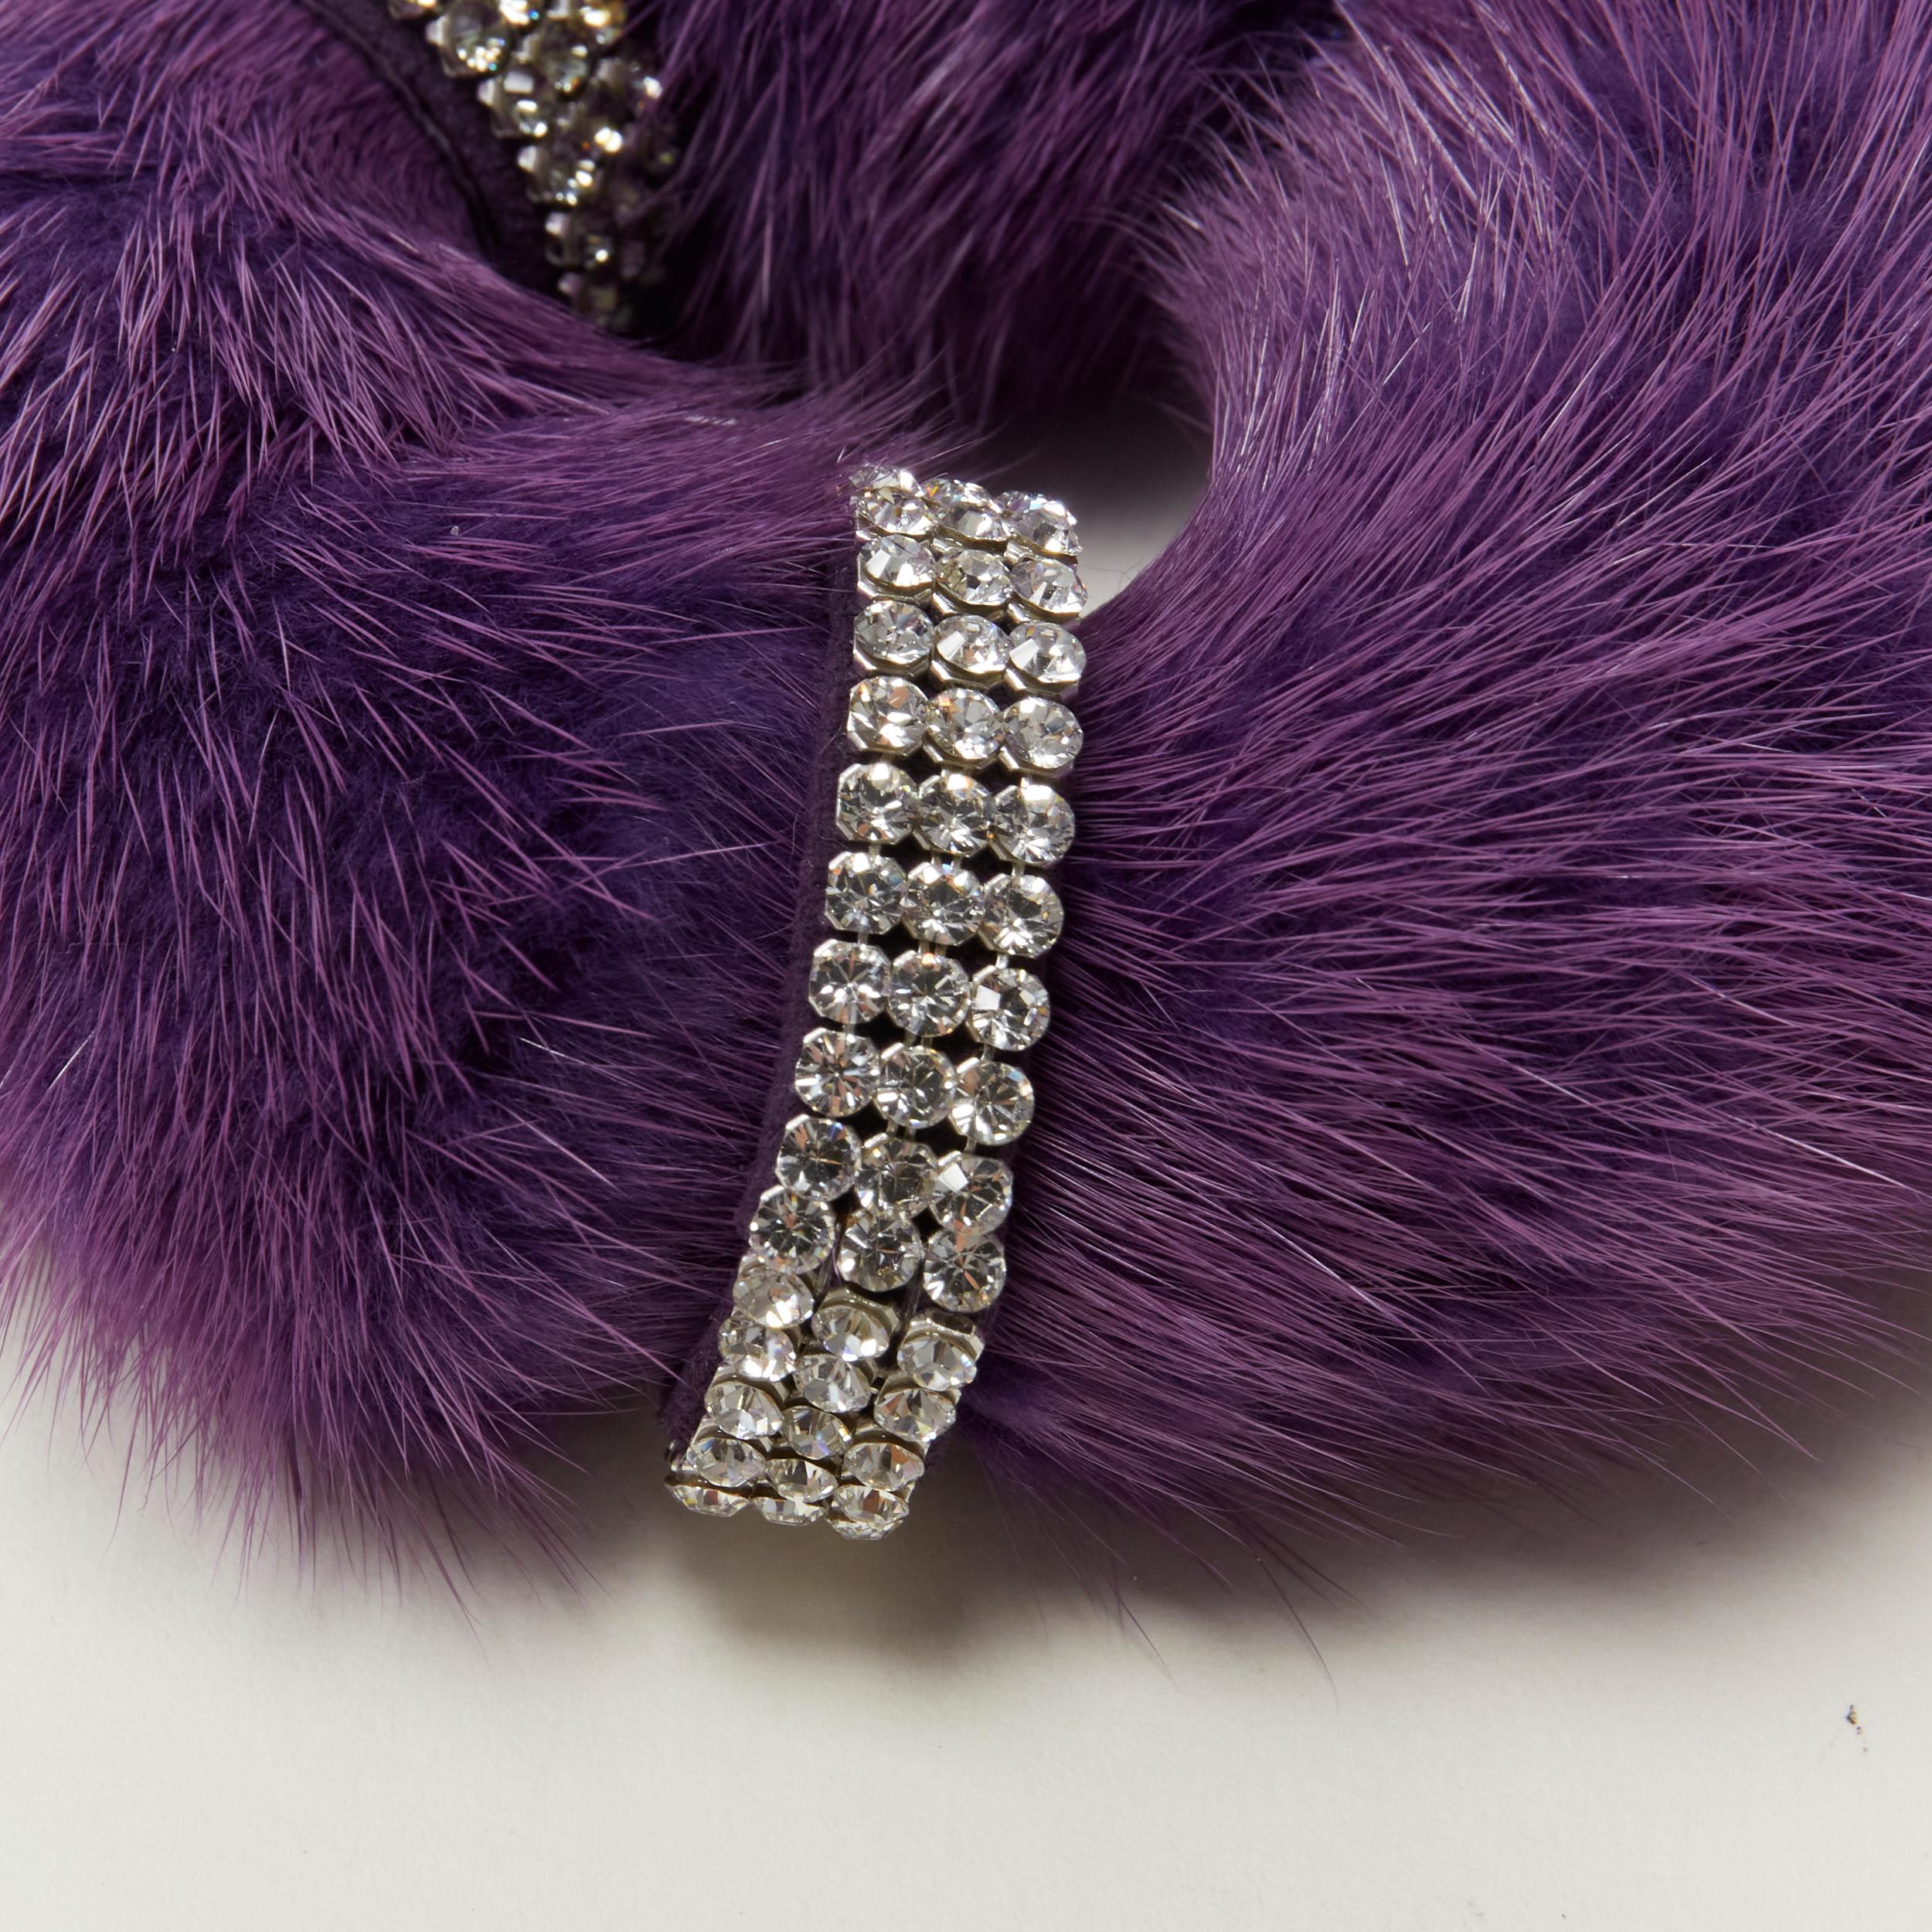 ALEXANDER ZOUARI purple fur crystal ring scrunchle hair tie 
Reference: ANWU/A00202 
Brand: Alexandre Zouari 
Designer: Alexandre Zouari 
Material: Fur 
Color: Purple 
Pattern: Solid 
Made in: France 

CONDITION: 
Condition: Excellent, this item was